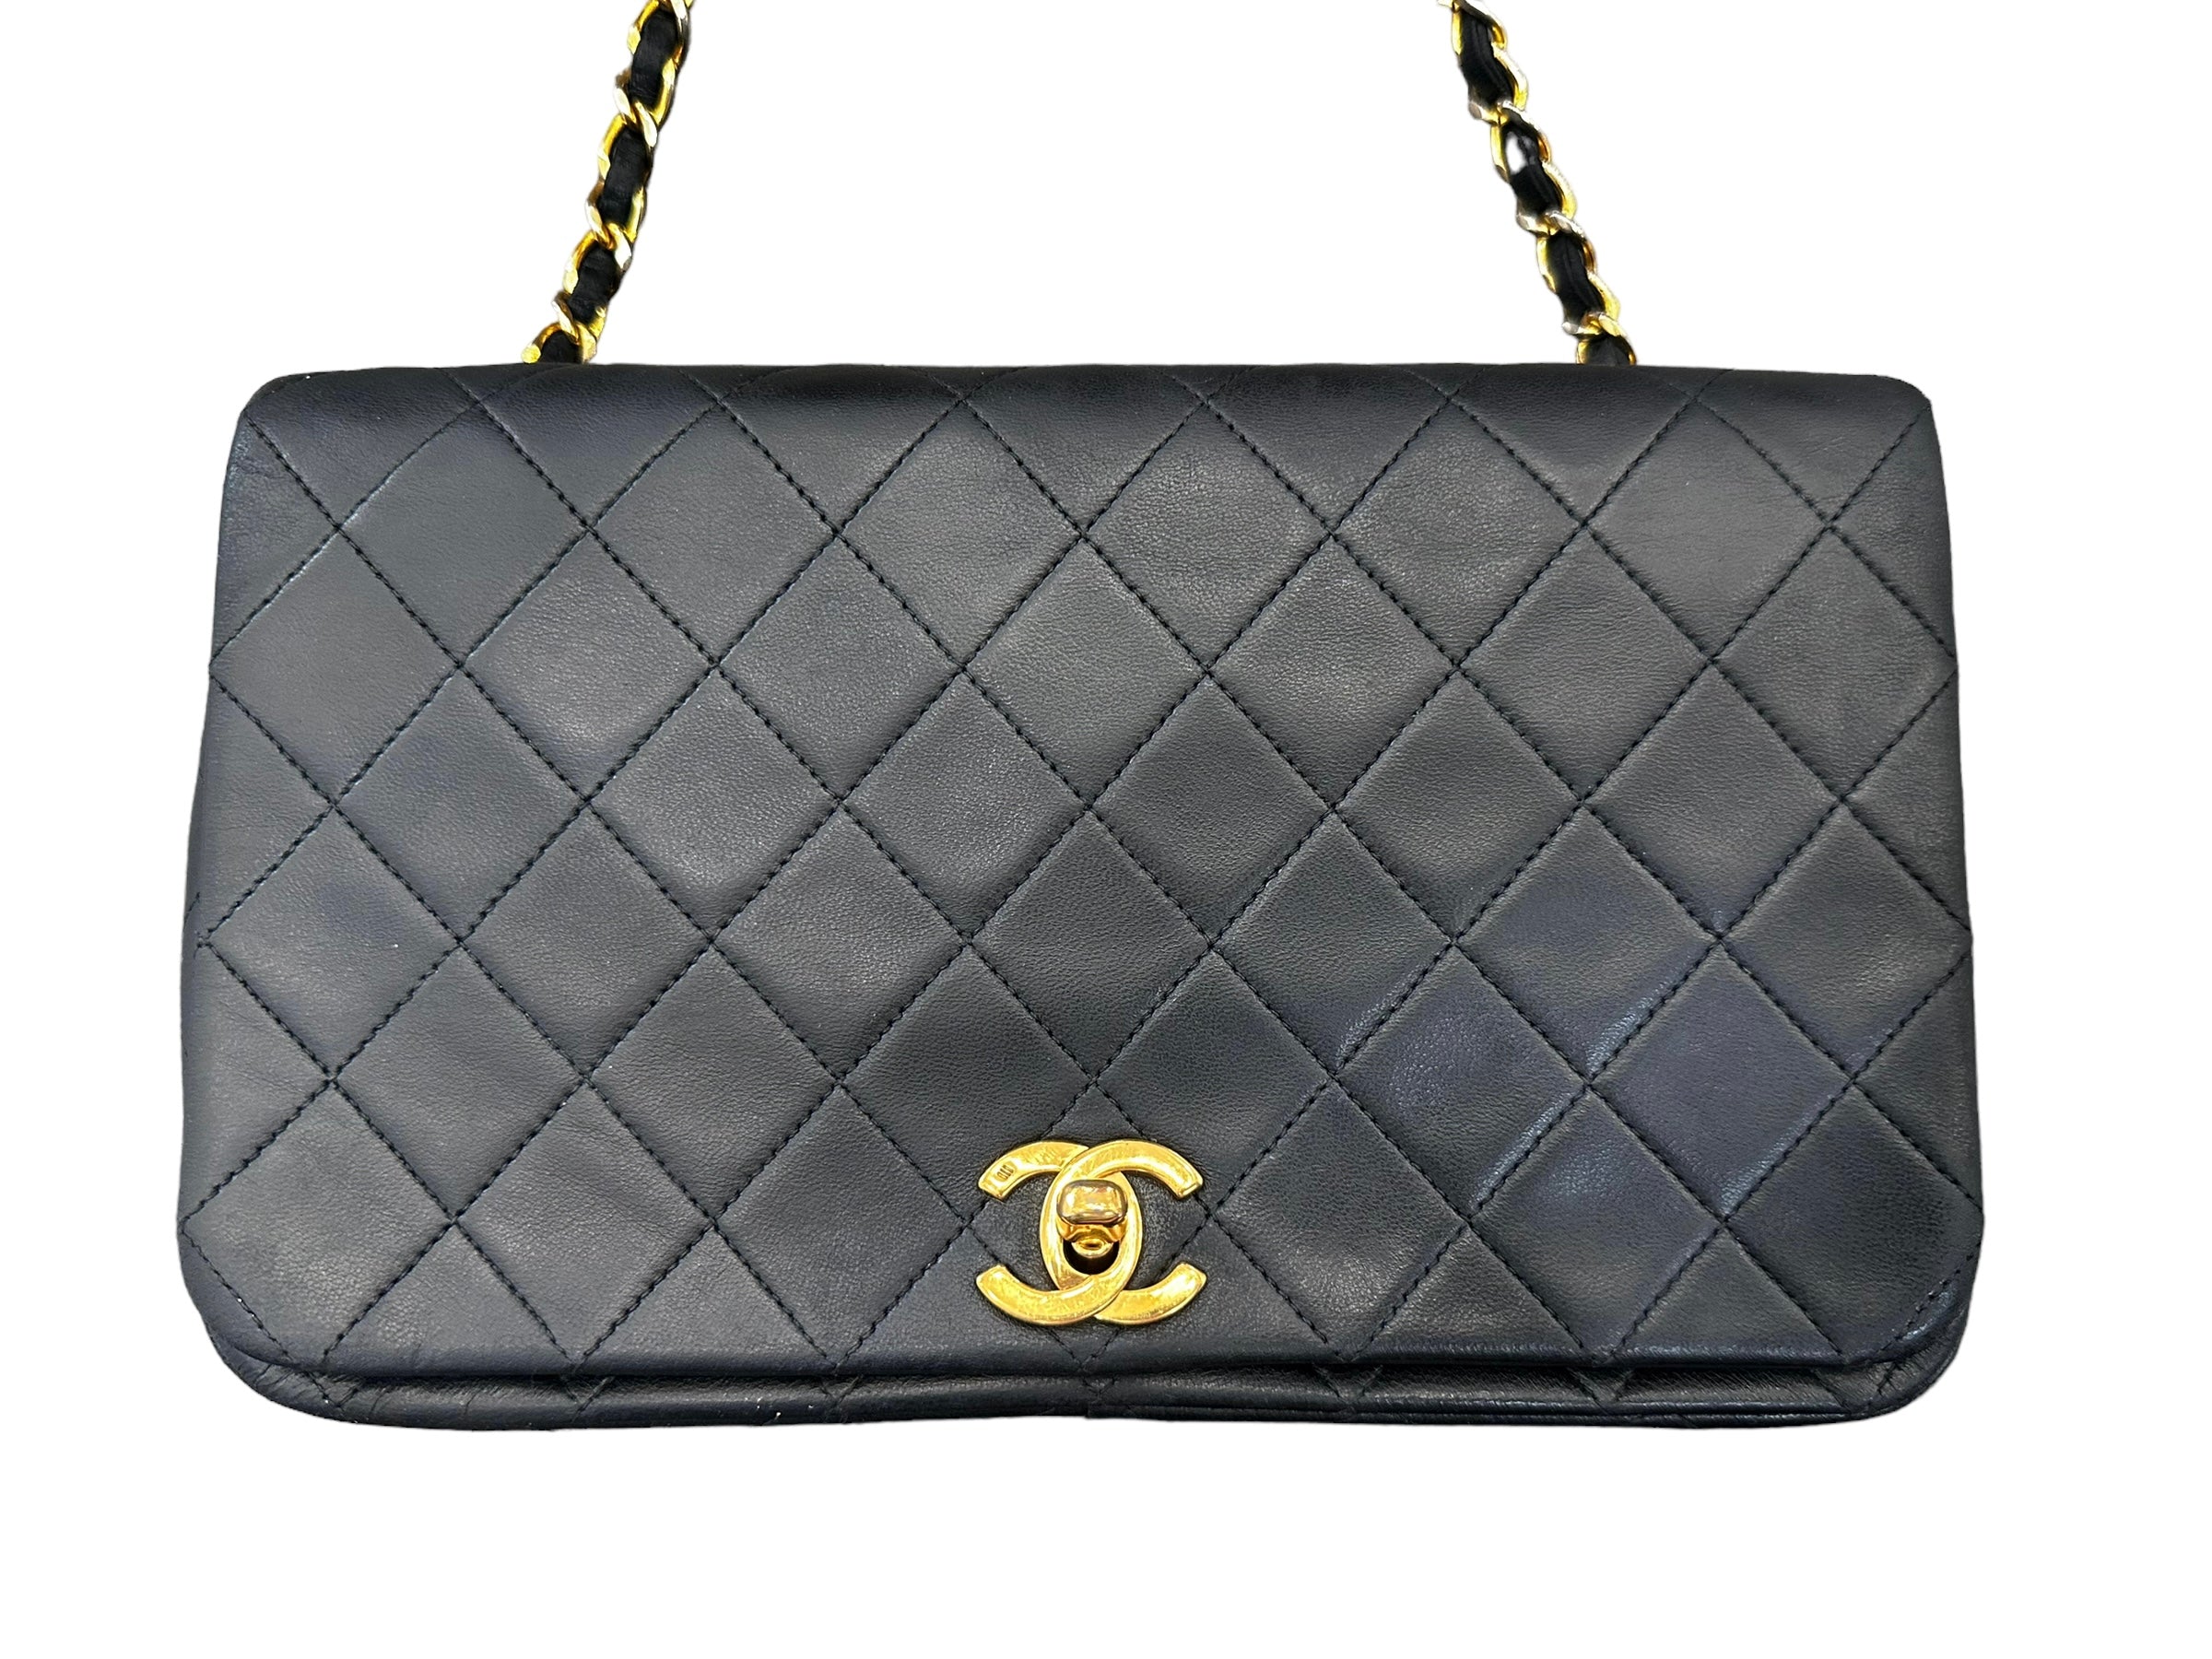 CHANEL matelasse classic bag size review ② Lambskin/size/What's in my bag?  CHANEL Review classic bag 